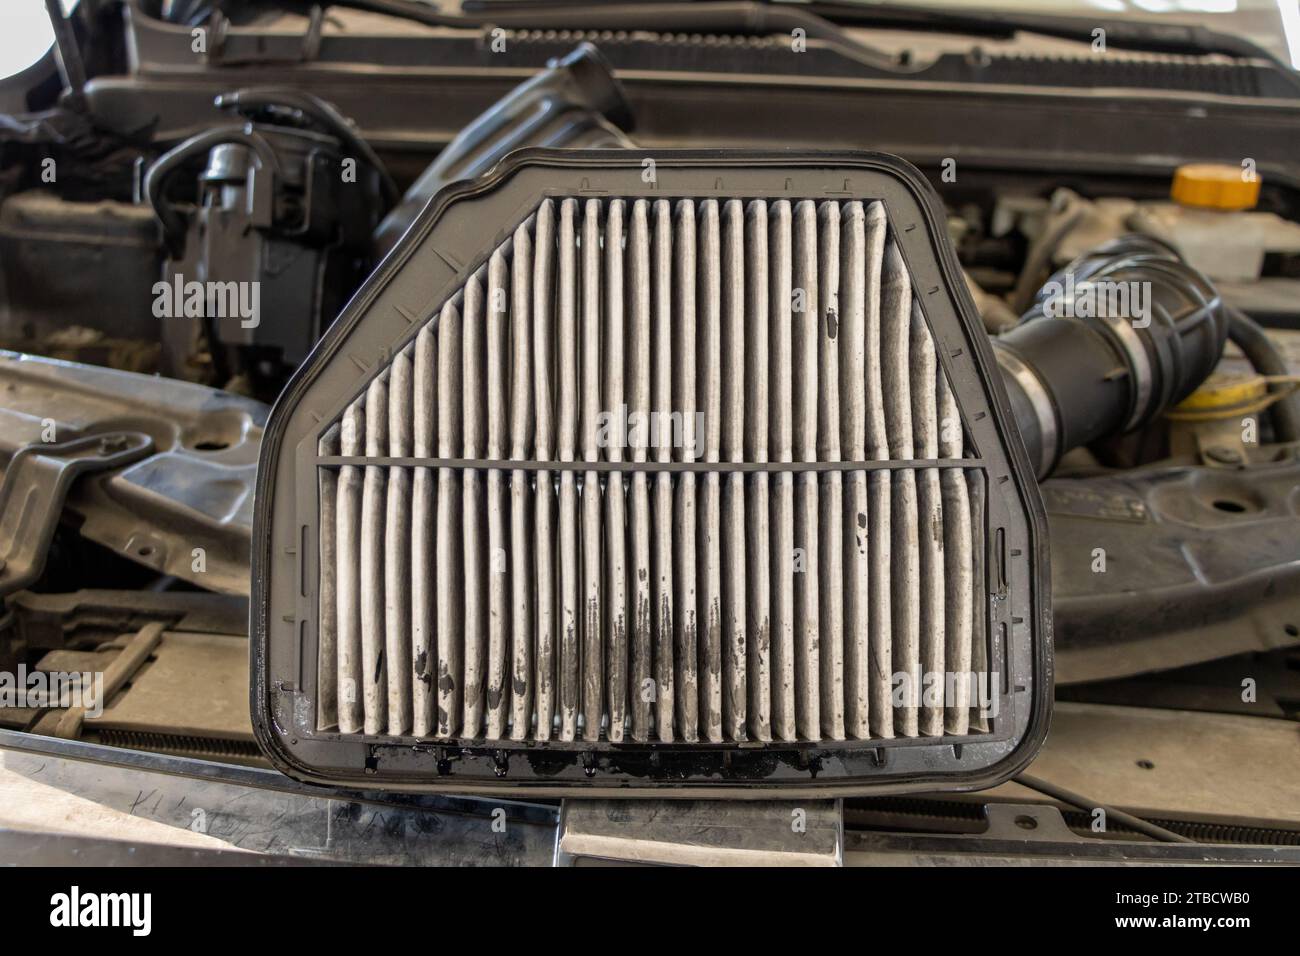 Car air filter replacement. changing a old air filter in cars engine. Mechanic replaces dirty air filter and installs new filter. Vehicle maintenance Stock Photo